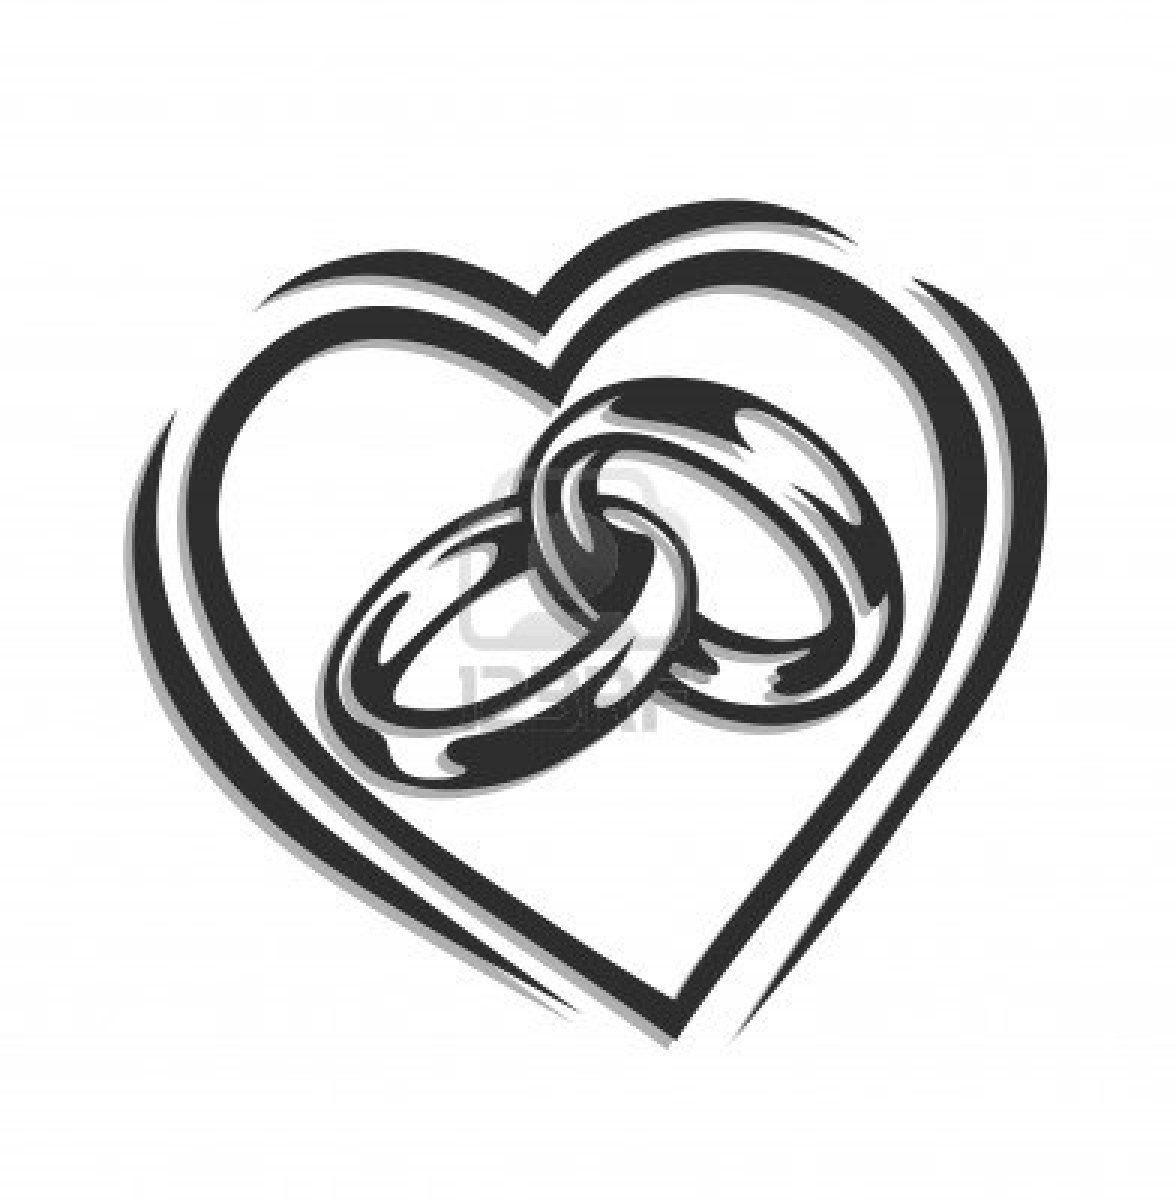 Image result for free clipart wedding rings intertwined